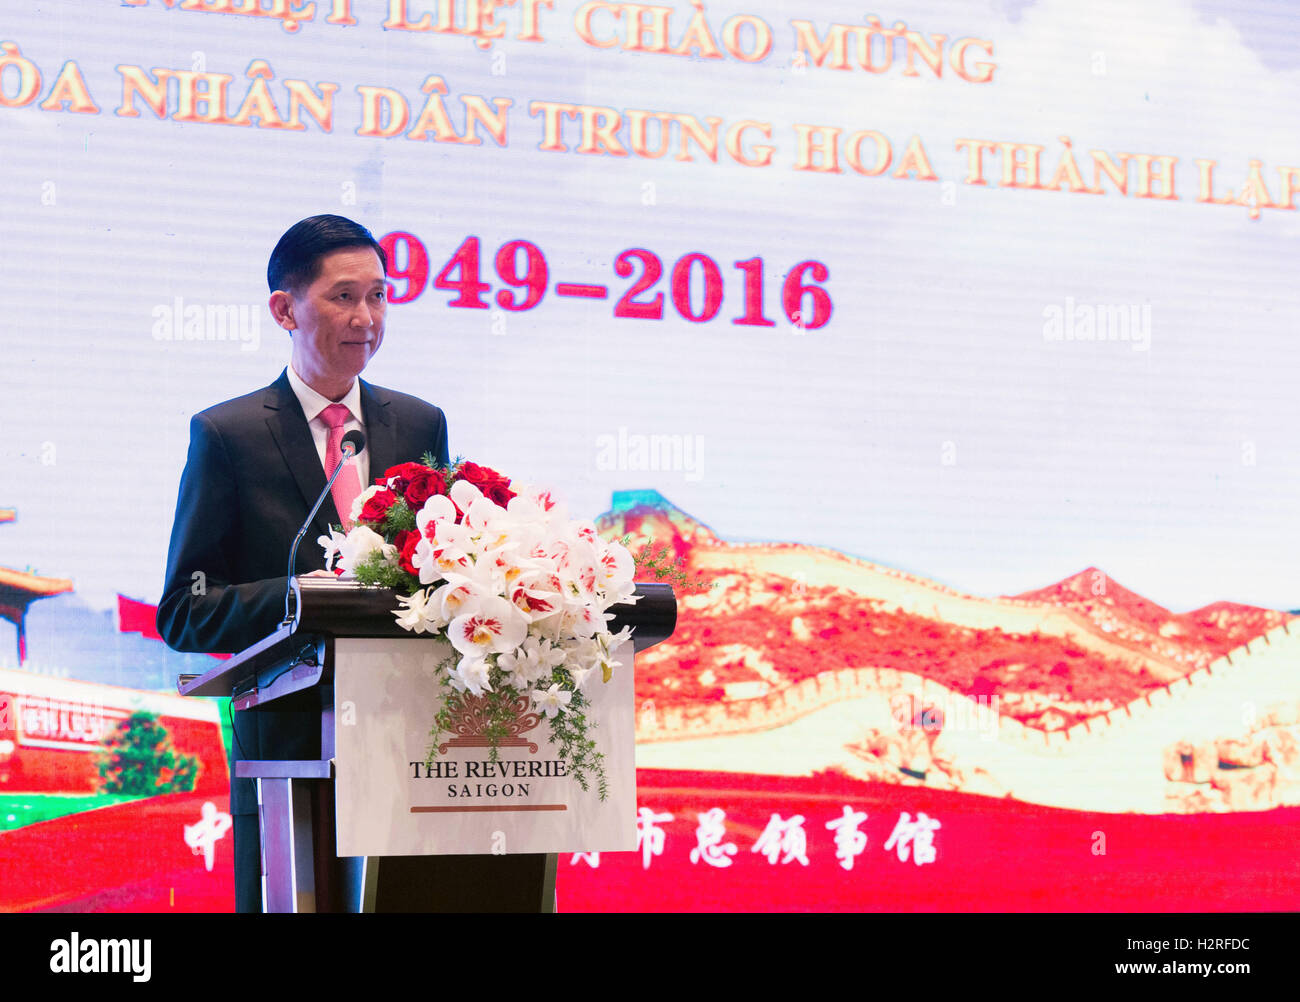 (161001) -- HO CHI MINH CITY, Oct. 1, 2016 (Xinhua) -- Vice Chairman of the Ho Chi Minh City People's Committee Tran Vinh Tuyen addresses a reception hosted by the Consulate General of China in Ho Chi Minh City, to celebrate the 67th anniversary of the founding of the People's Republic of China, Sept. 30, 2016. (Xinhua/Hoang Thi Huong)(cl) Stock Photo